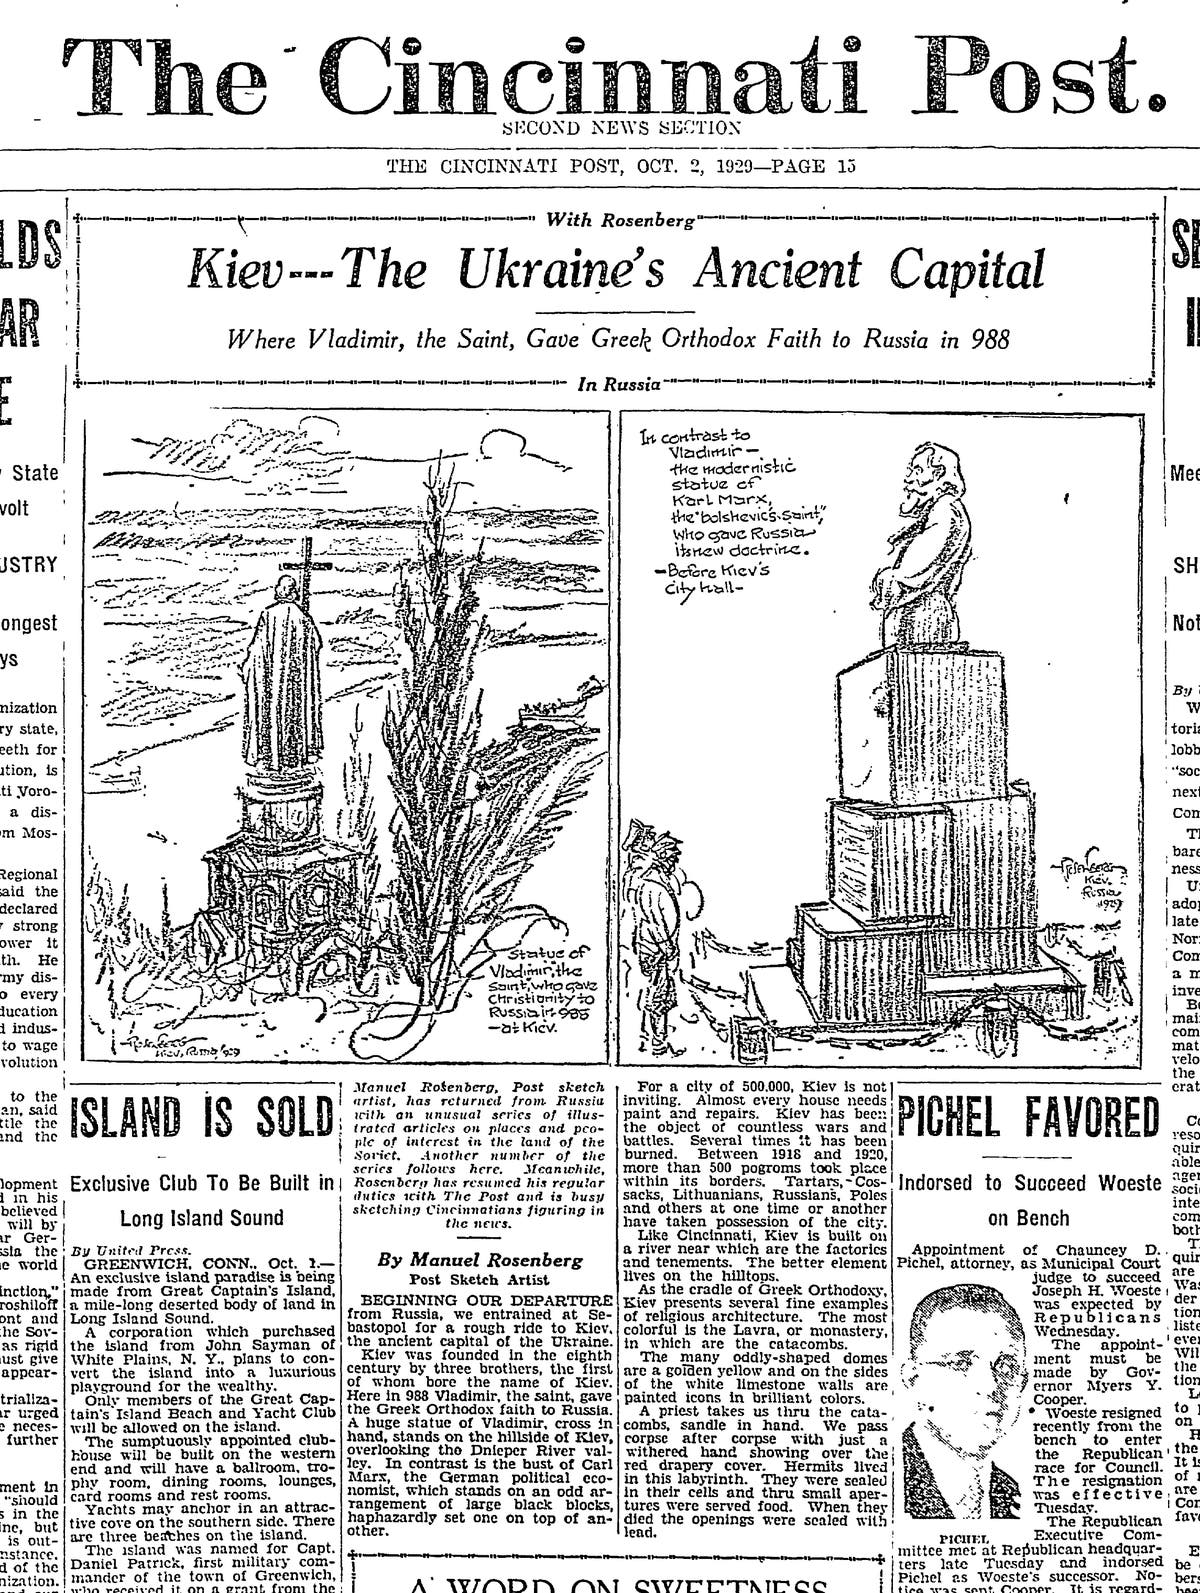 An American correspondent’s surprising insights from Russia and Ukraine in 1929